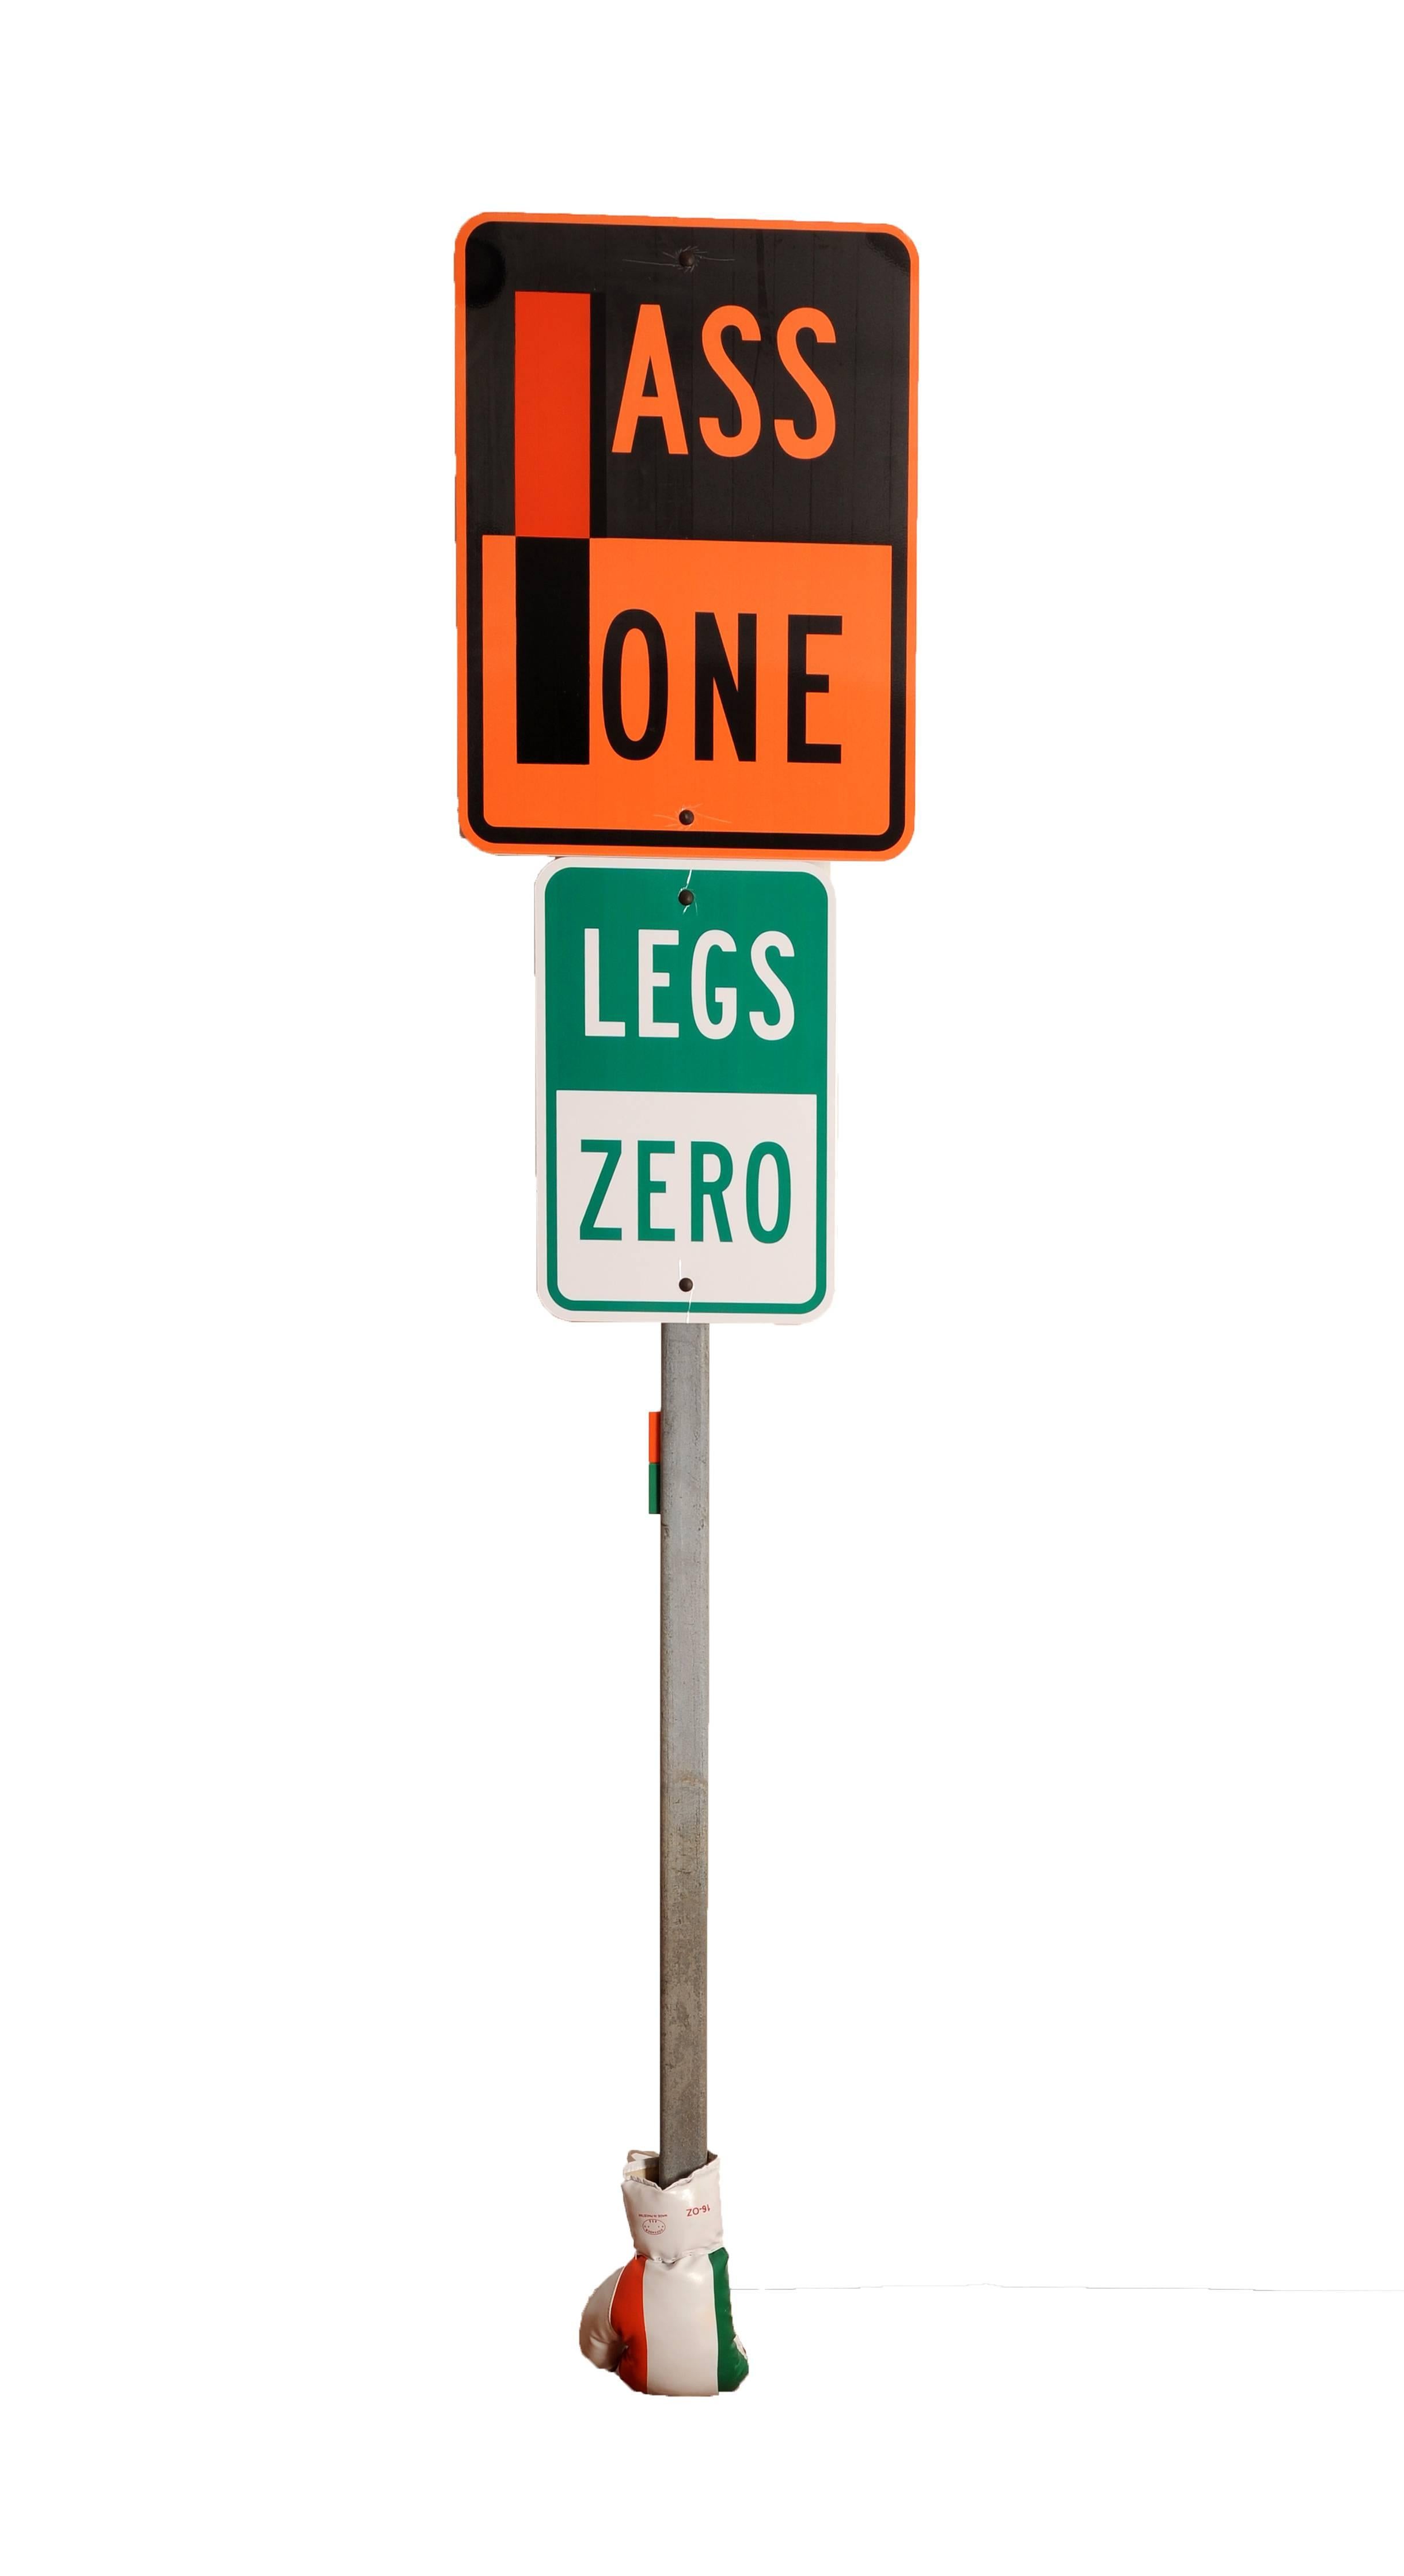 Ass One, Legs Zero
Steel, traffic signs
82 x 18 x 3.5 in (208 x 46 x 9 cm)
2014

Artist Statement:
"Day art calls into play arguments that mesh like gears, results that have the force of certainty....Conscious of its progress, proud of its past,